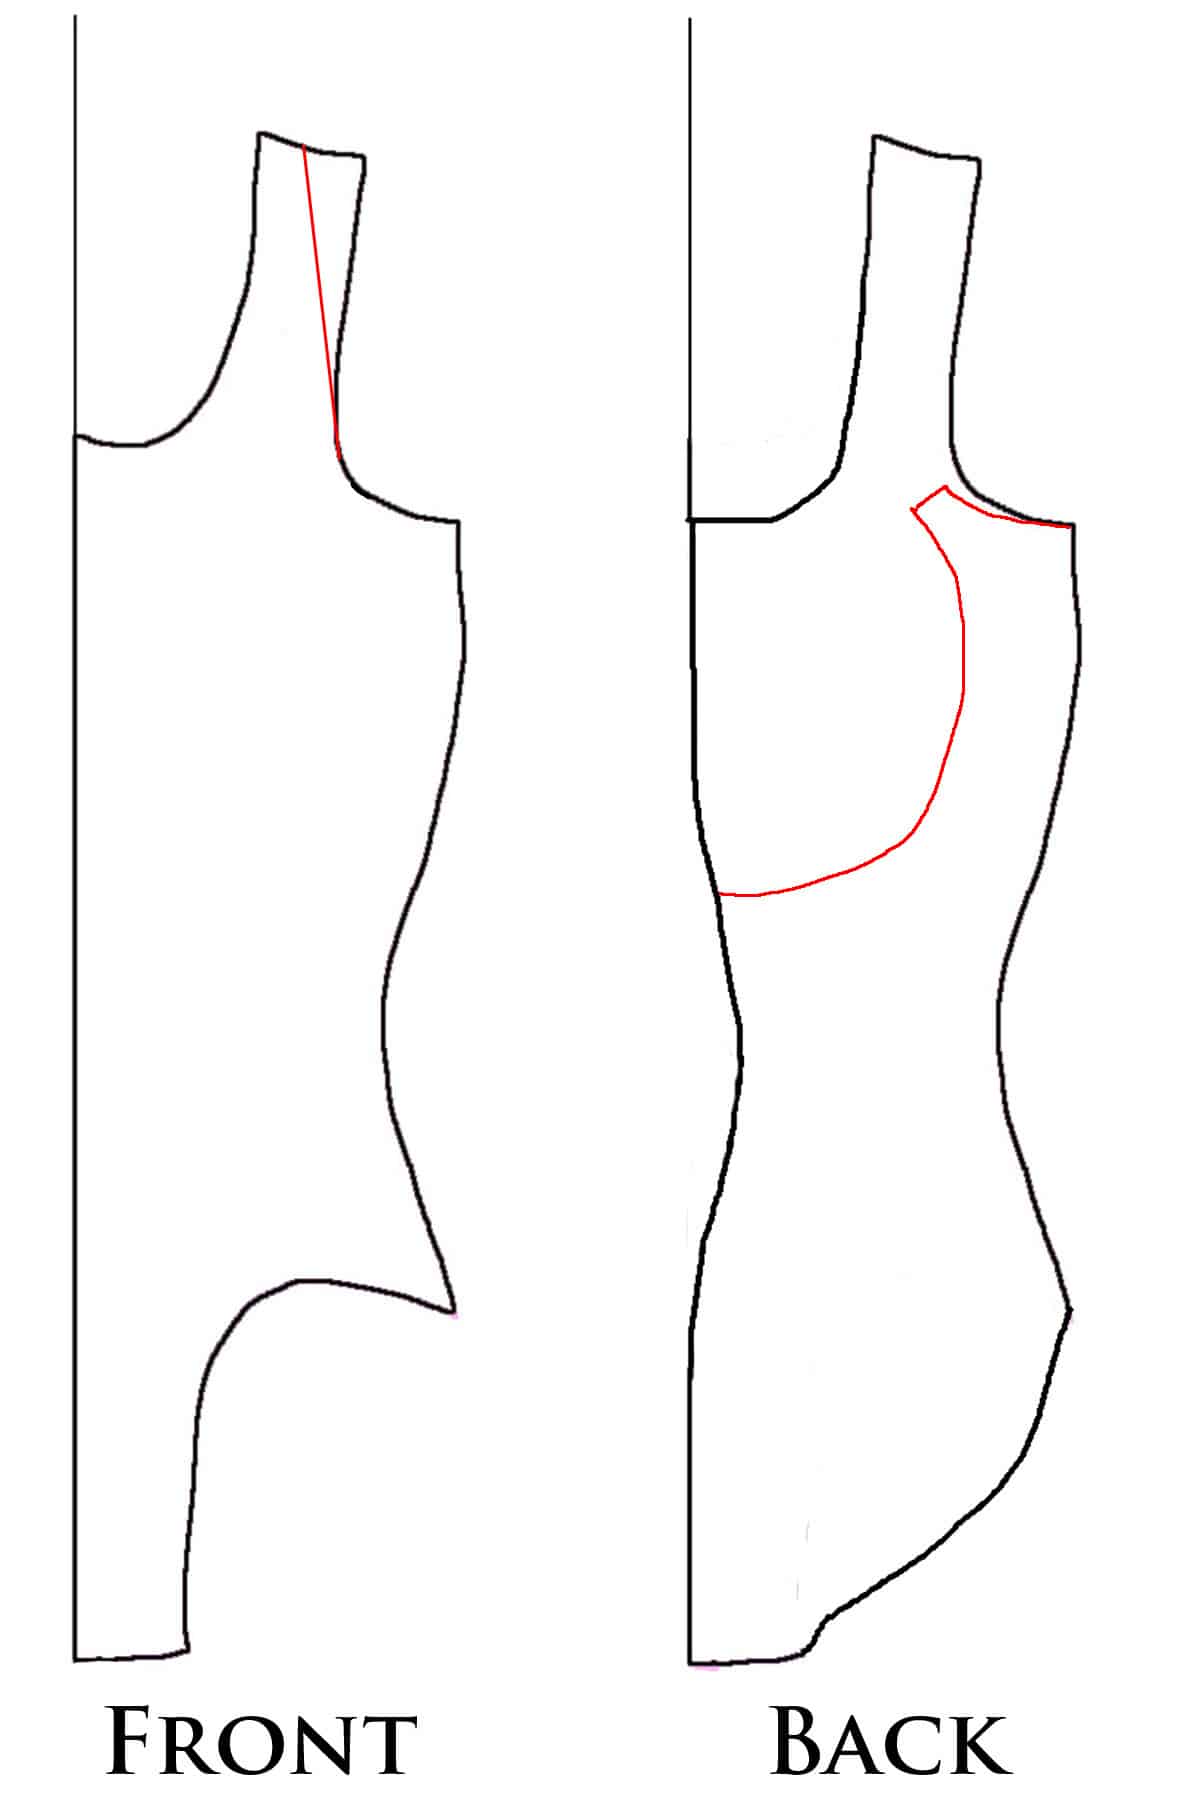 Diagram of the strappy back pattern alteration, as described in the post.